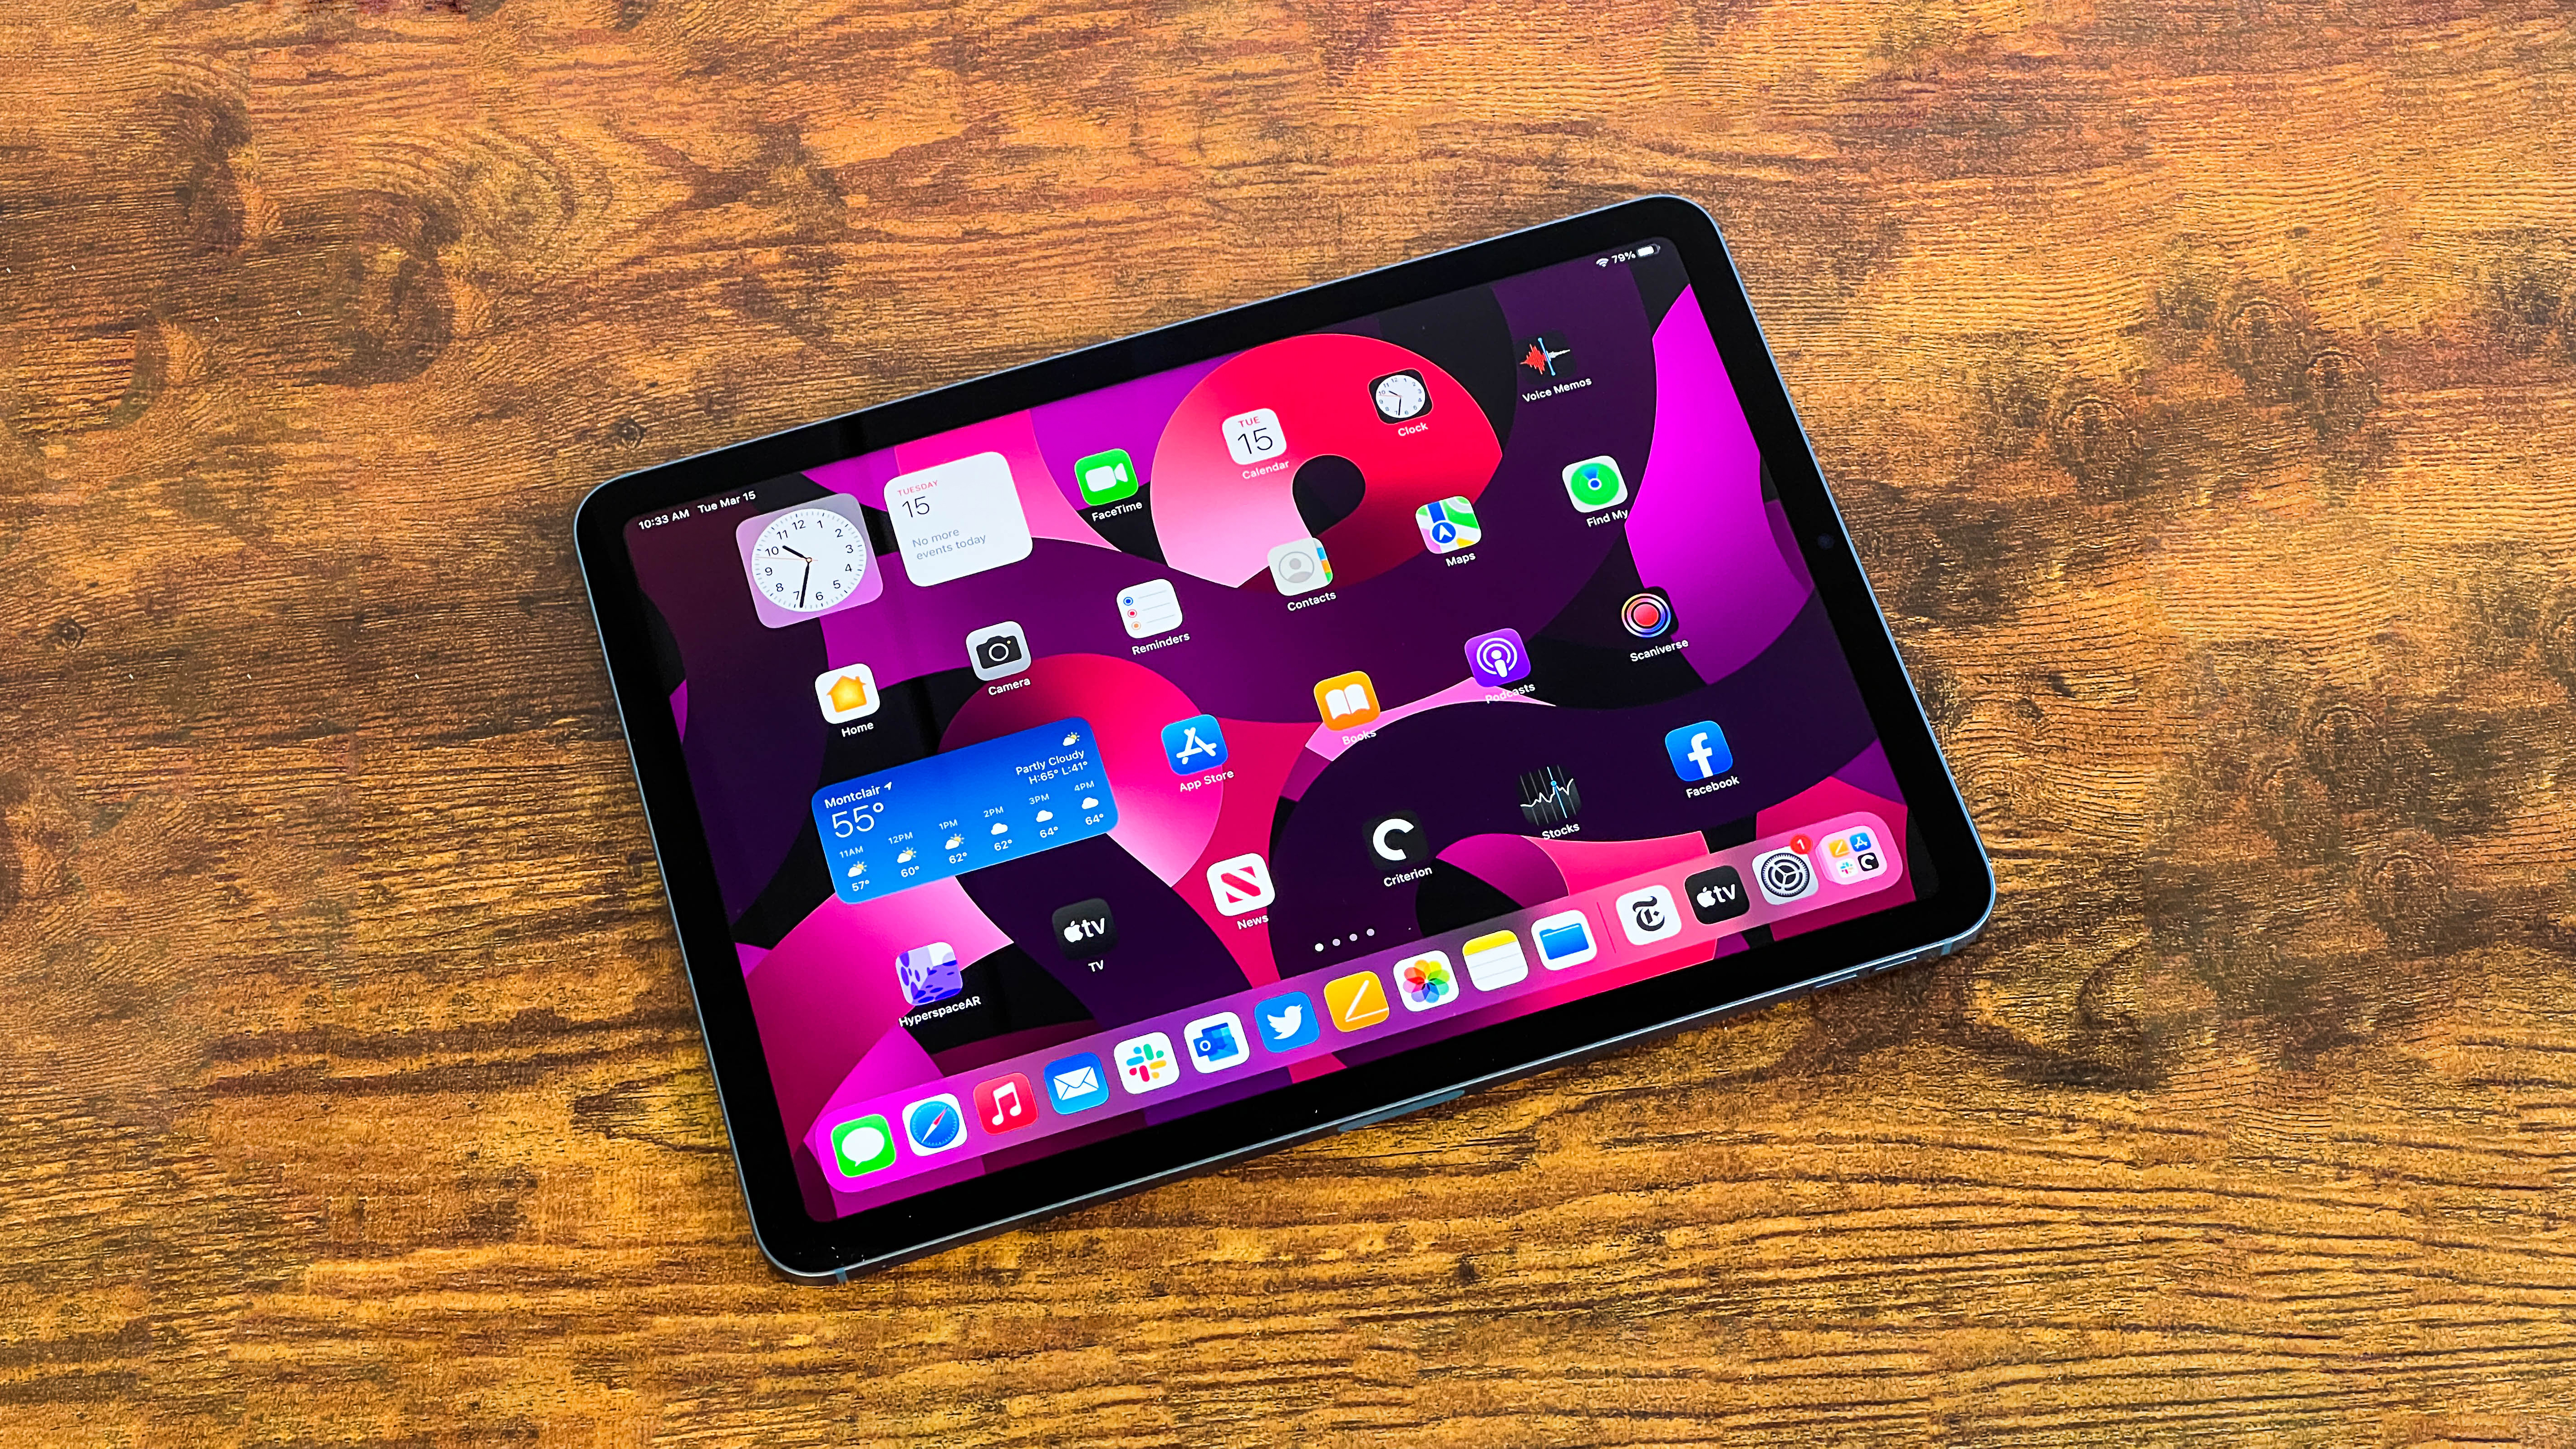 Best iPad Deals: Save Up to $150 on iPad Air, iPad Mini and More - CNET